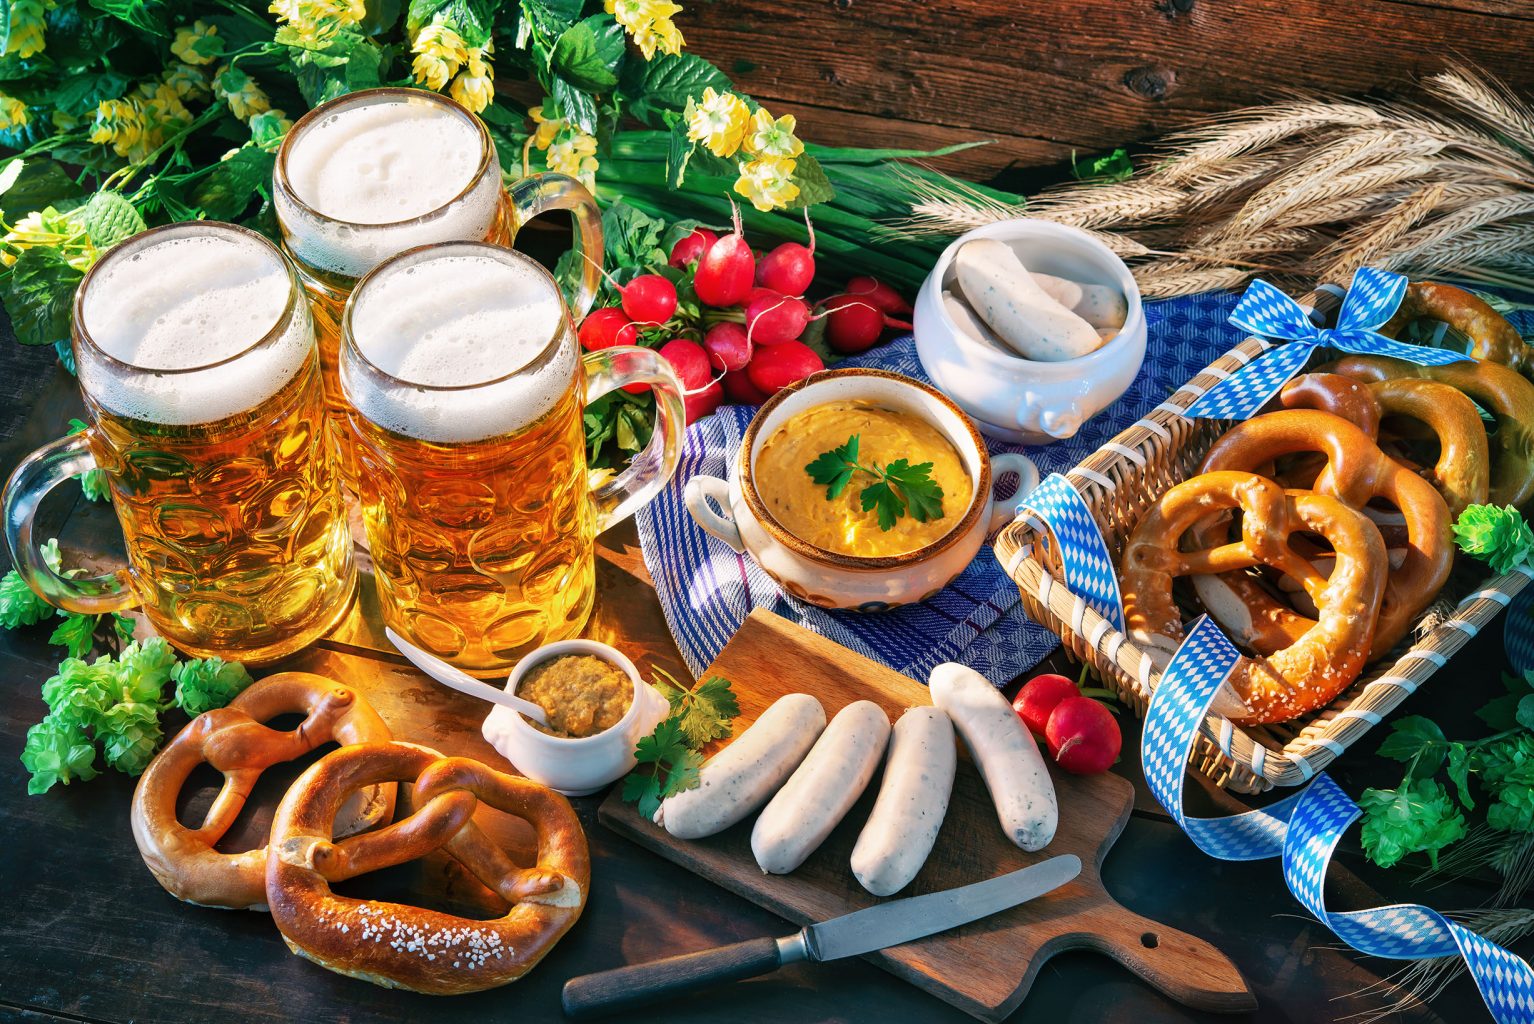 This Mouth-Watering Menu For Concord’s ‘Oktoberfest’ is Exactly What Your Hunger Needs